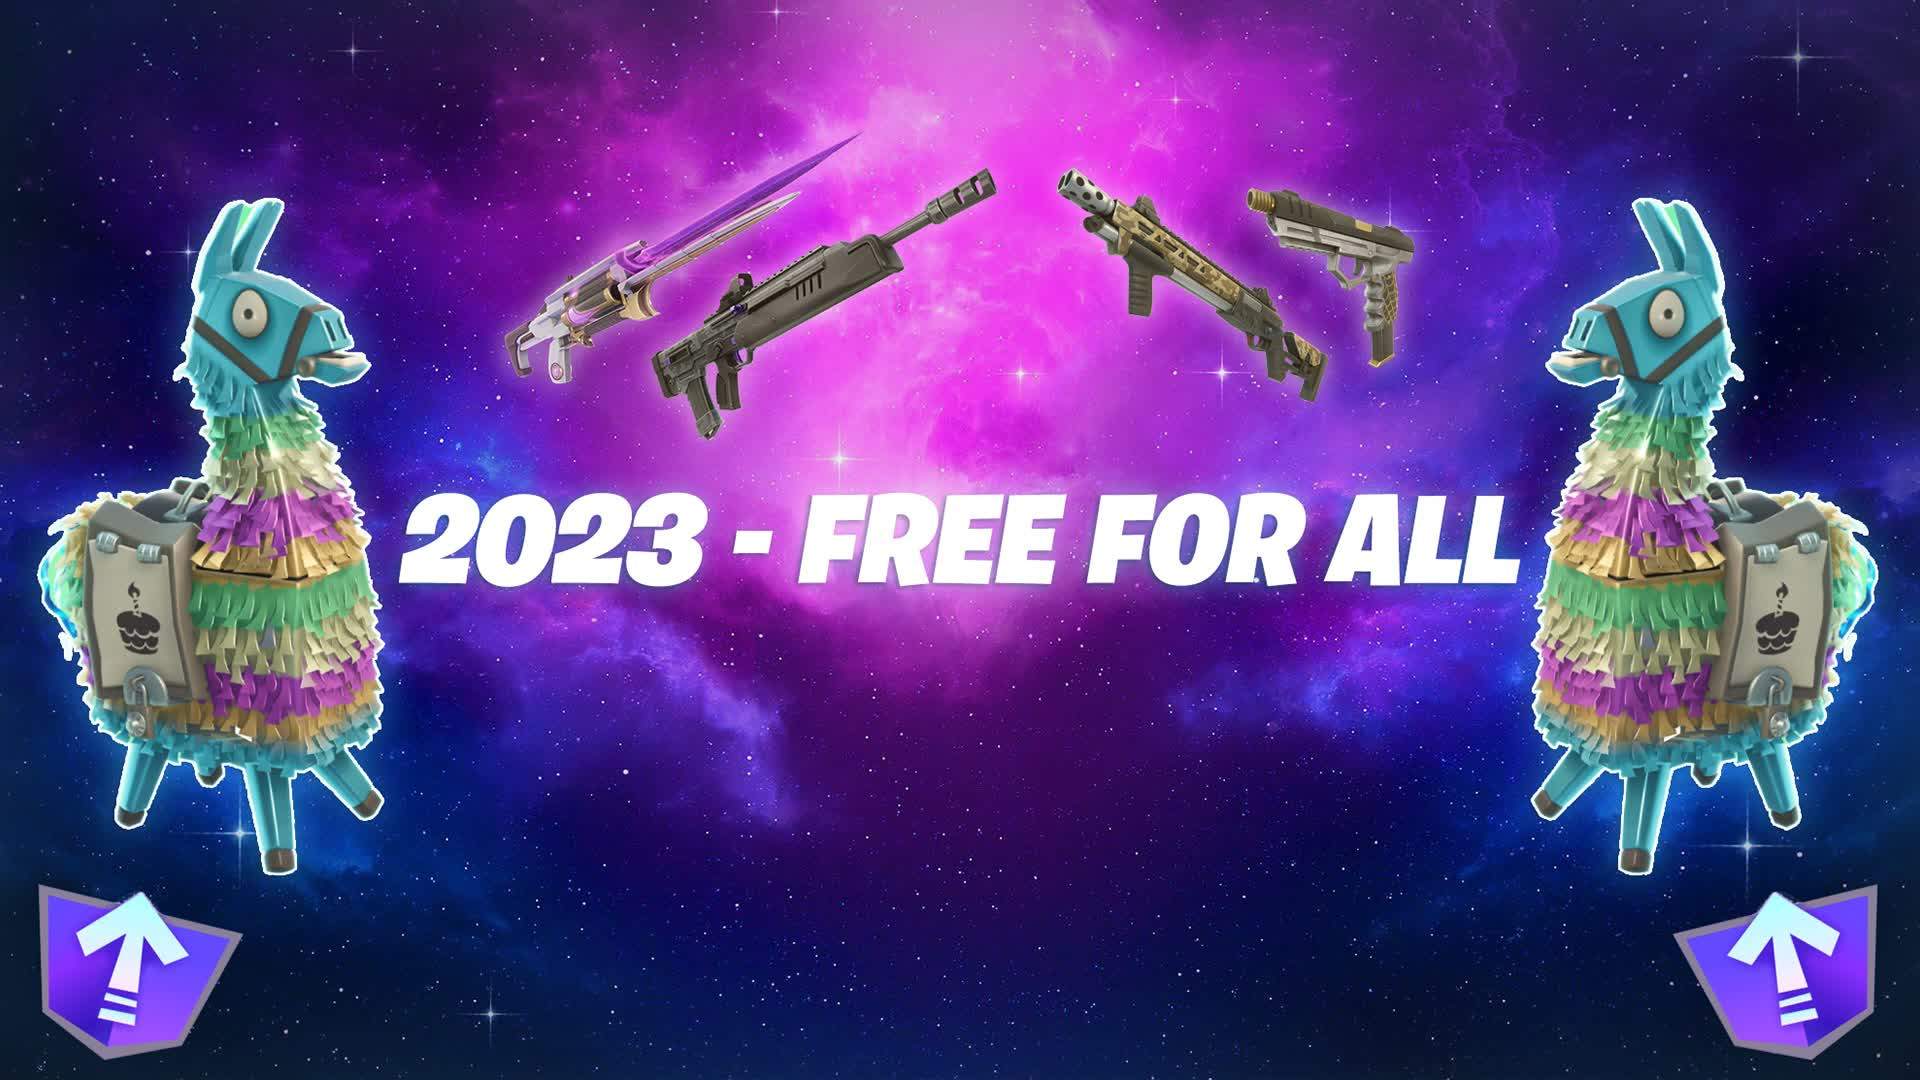 🌟2023 - FREE FOR ALL🎆